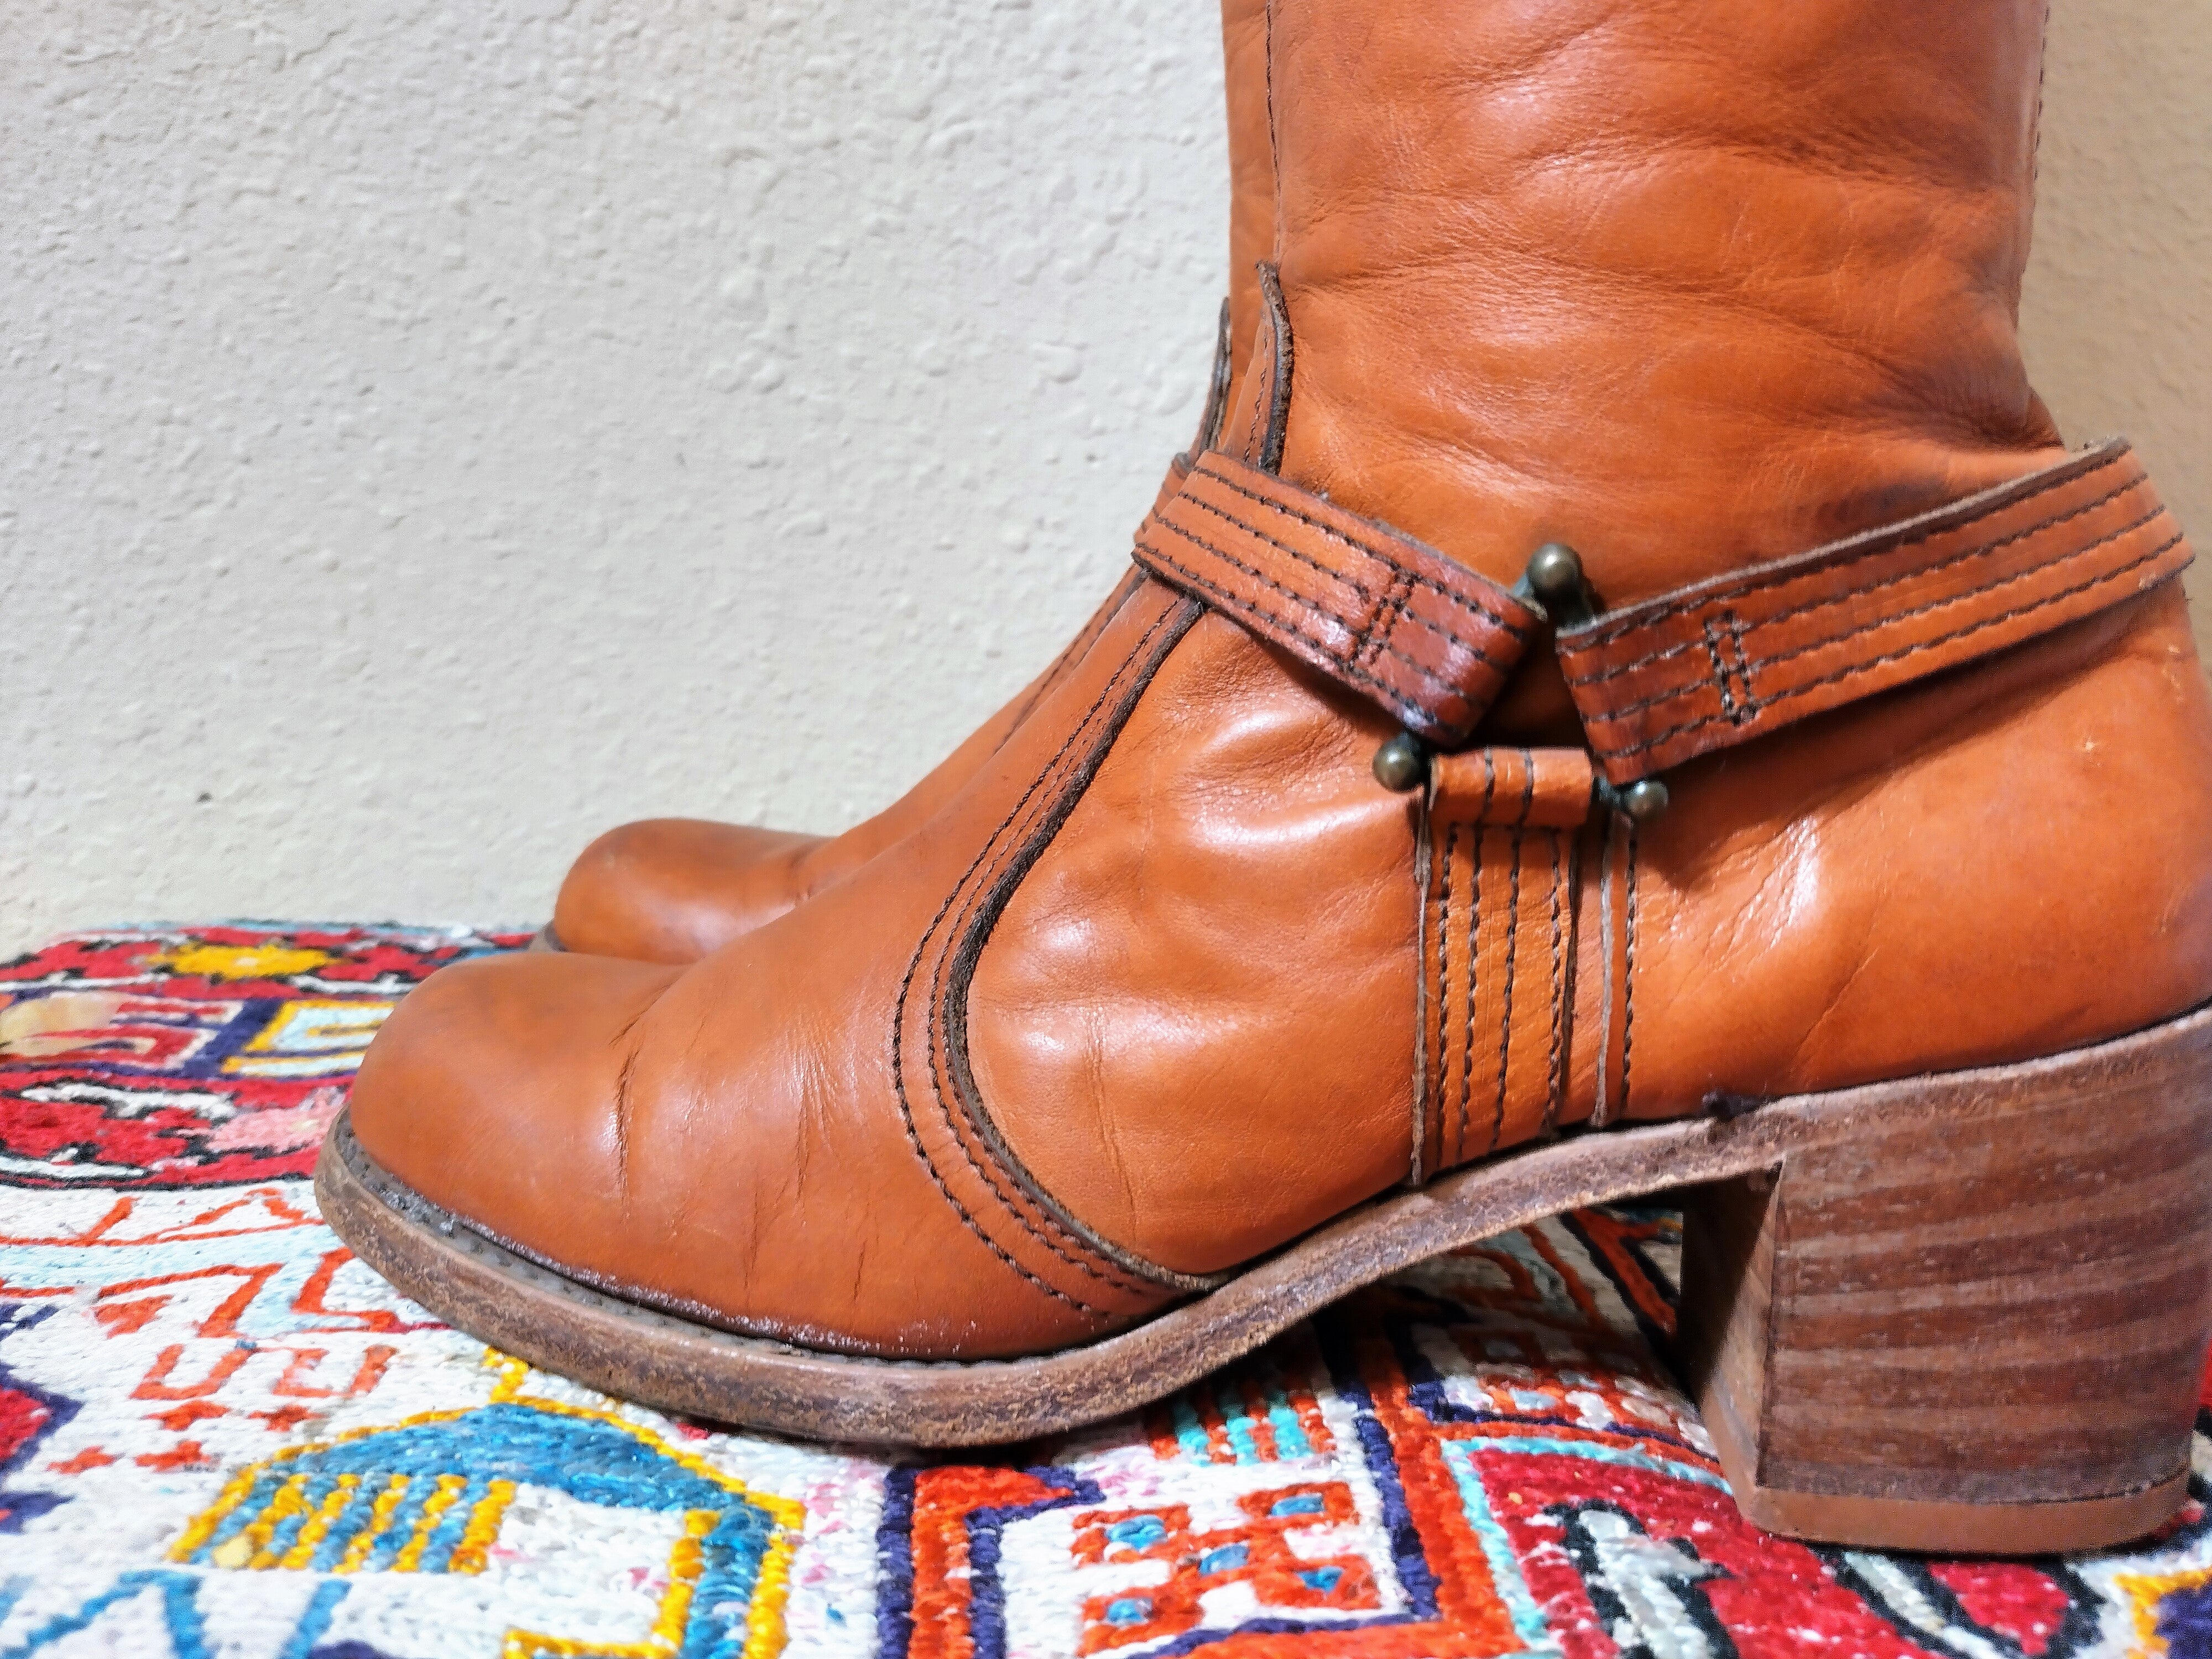 Vintage 60s/70s Rare Harness Style Campus Penny Lane Boots by Dexter